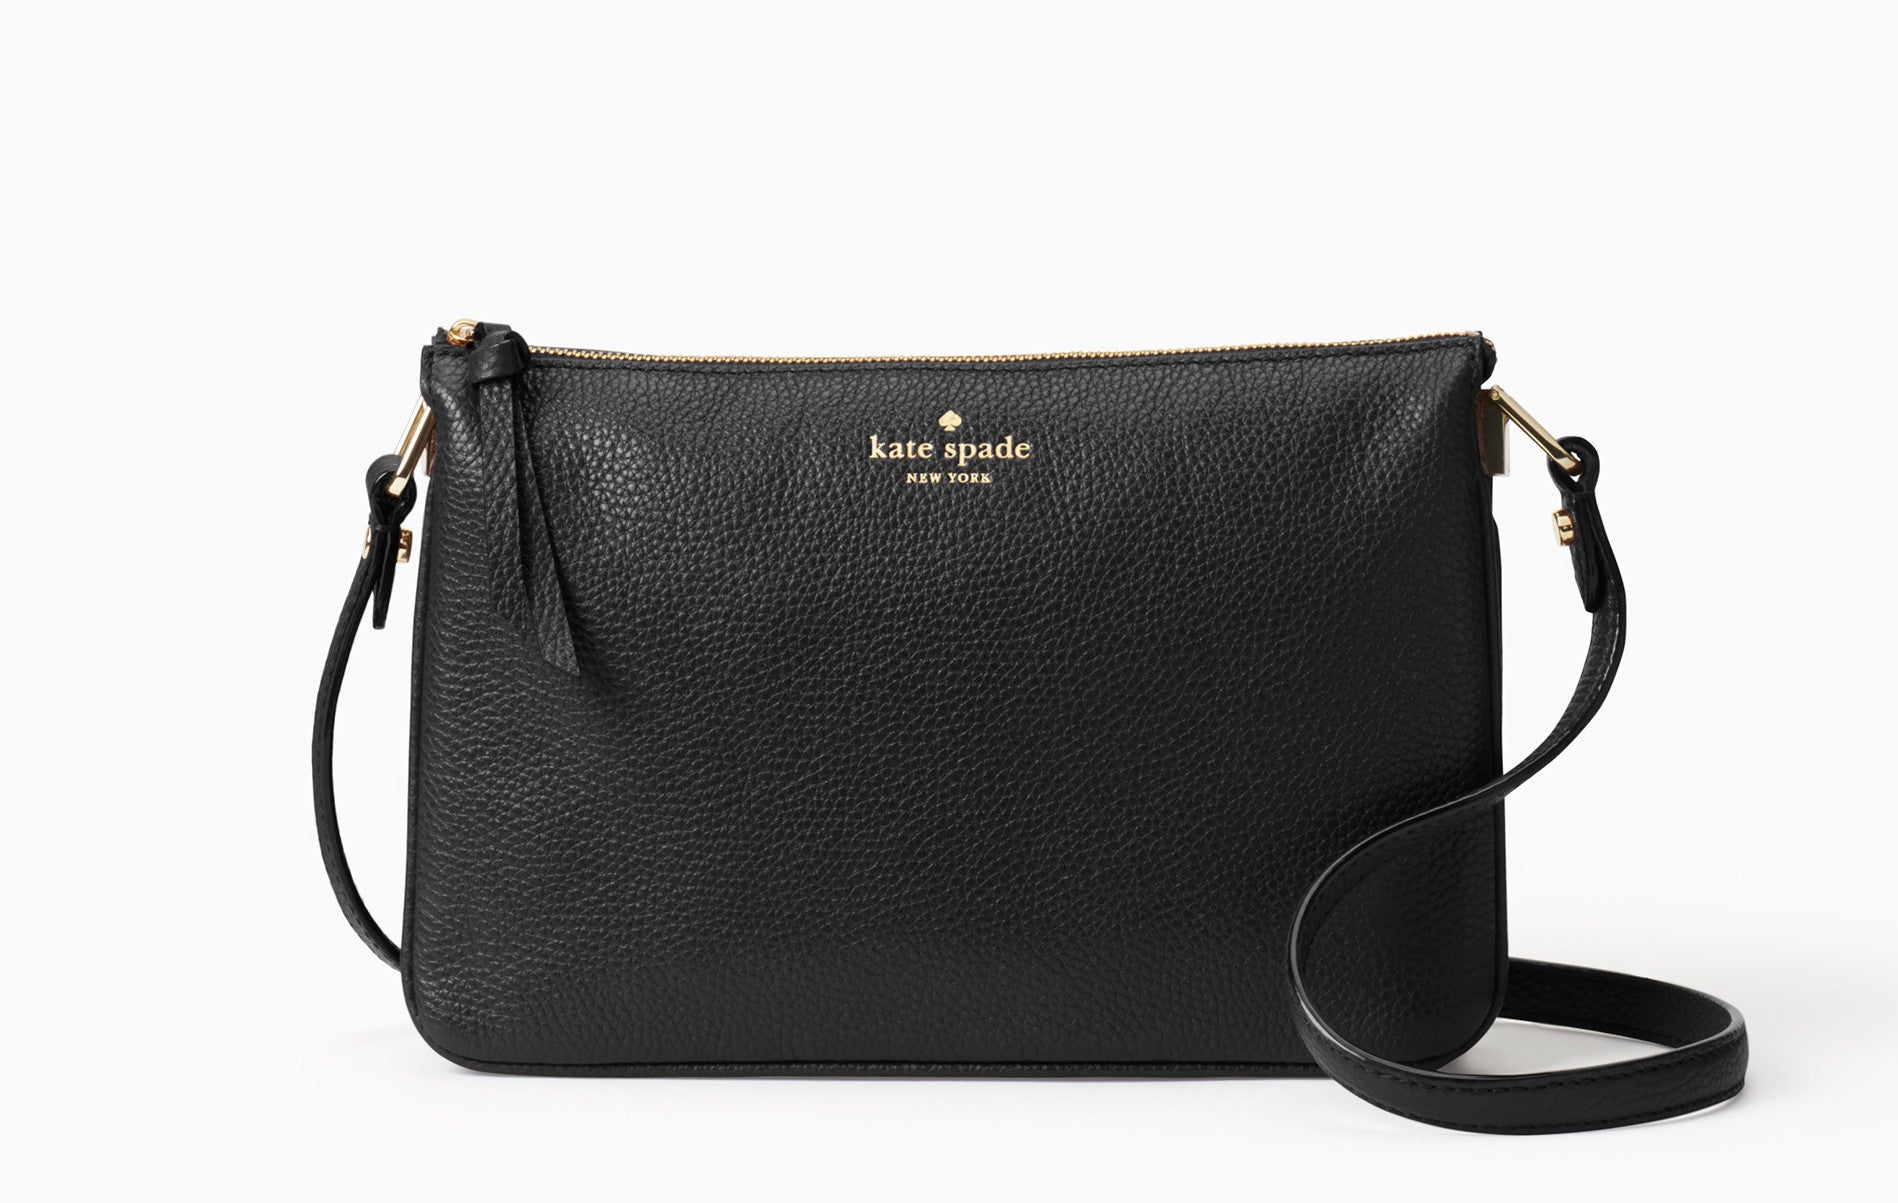 Kate Spade Deal of the Day: Save $220 on the Perfect Everyday